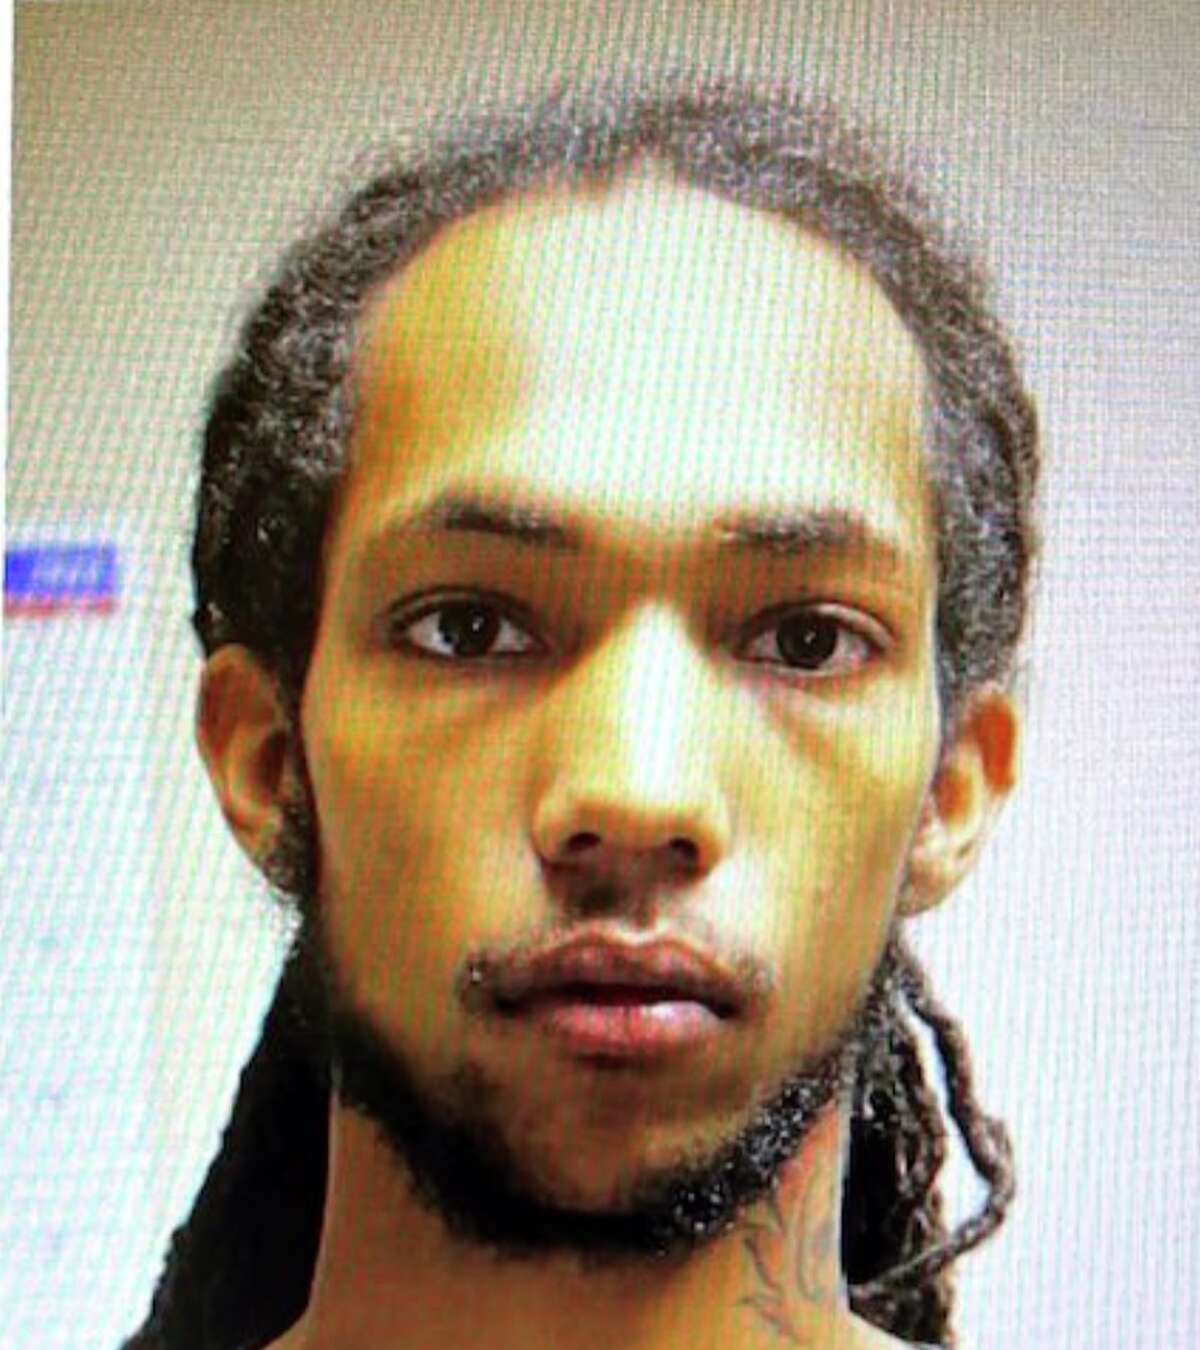 Jermaine Joseph, 19, of Norwalk, was arrested in New Canaan early Monday morning after officers discovered firearms and ammunition in a Honda CRV in which he was a passenger, according to New Canaan police.